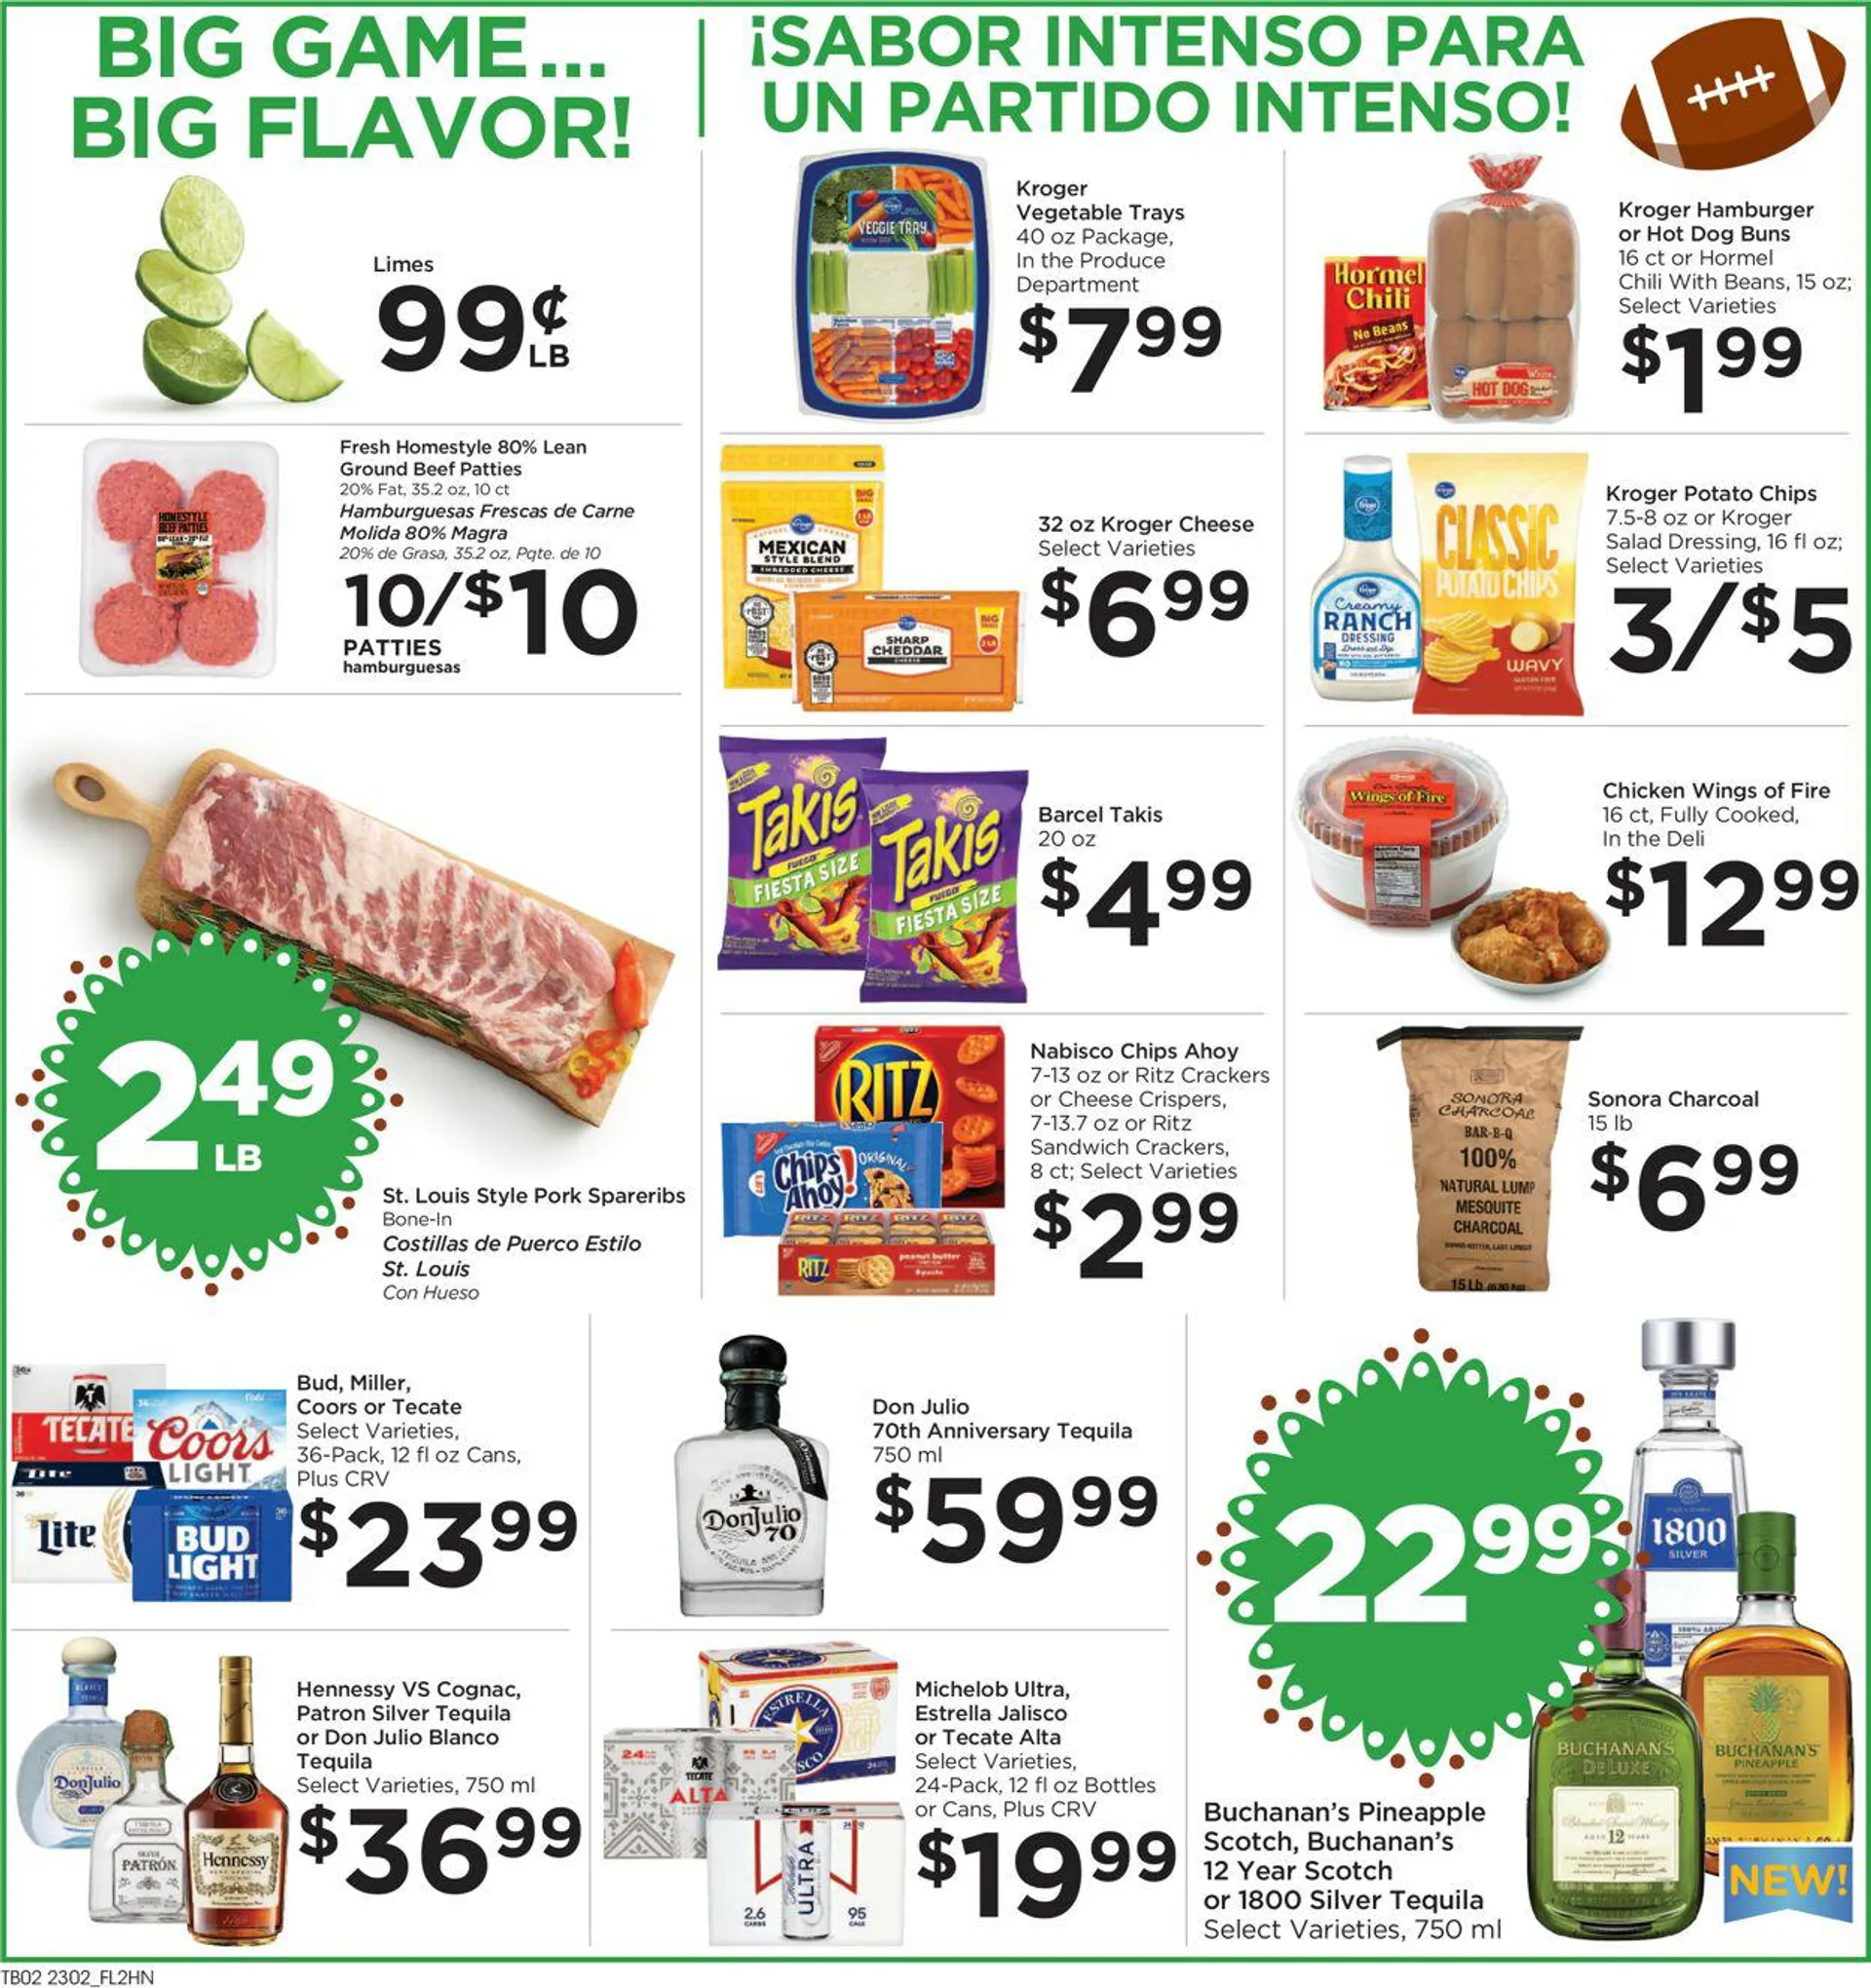 Foods Co. Current weekly ad - 3